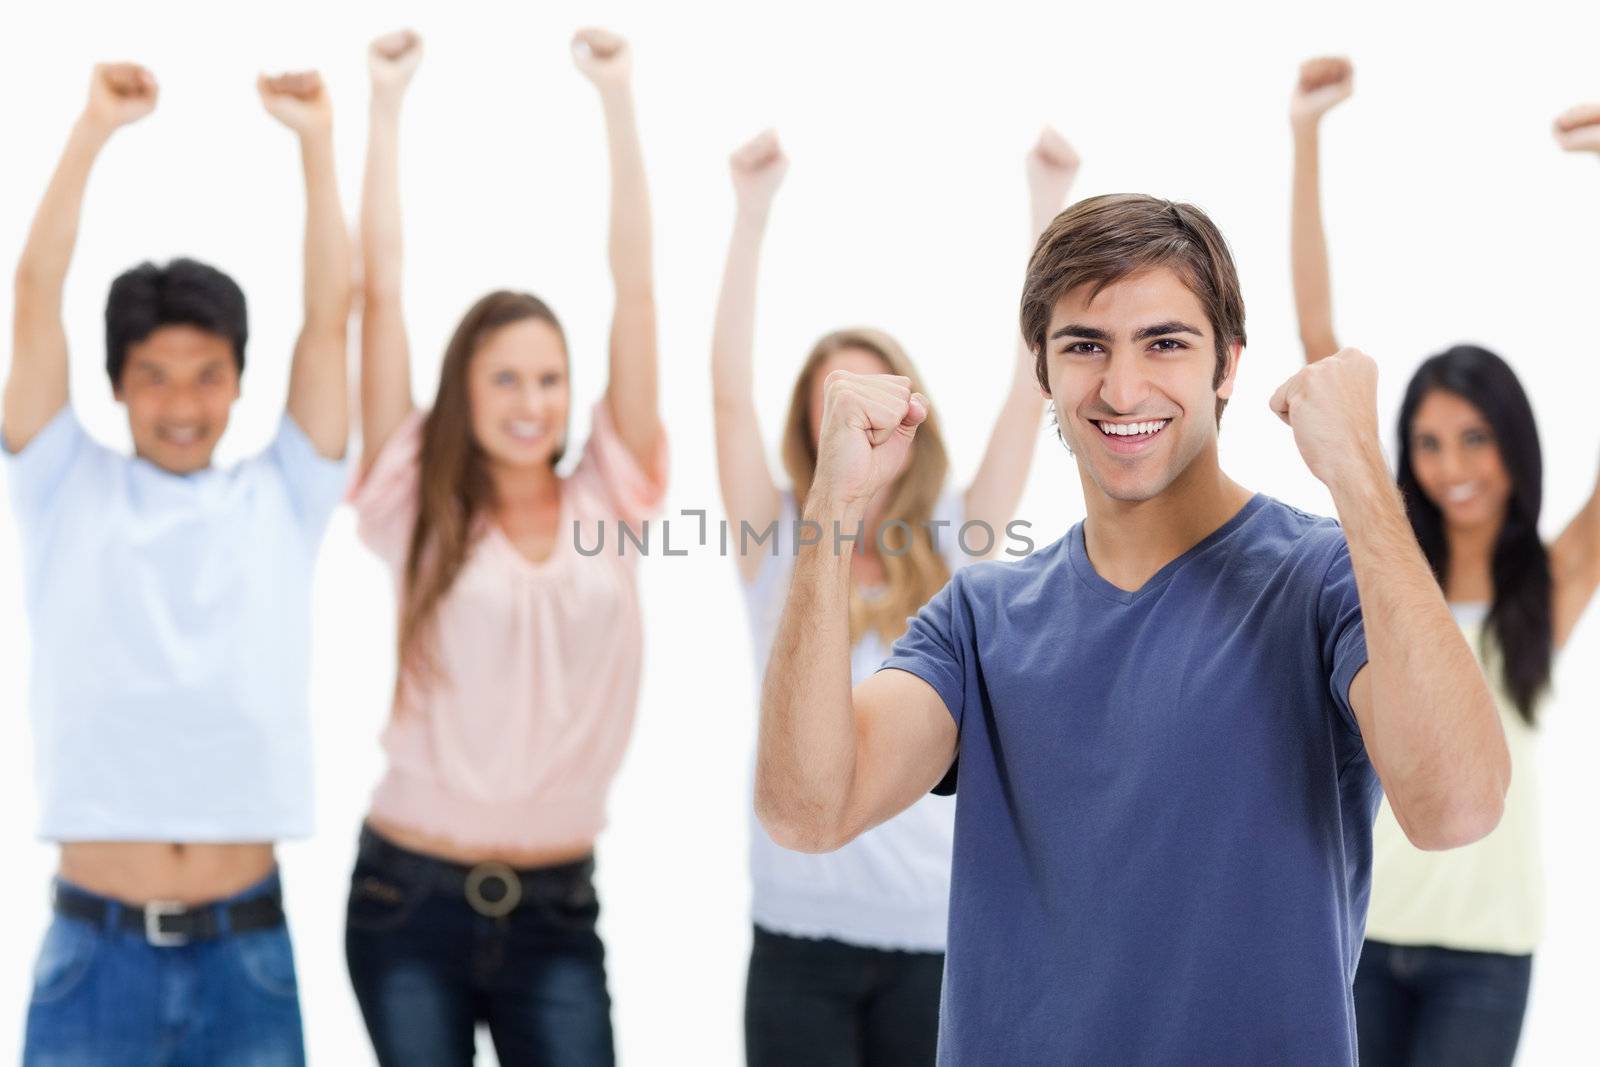 Man clenching his fists with people behind him raising their arm by Wavebreakmedia